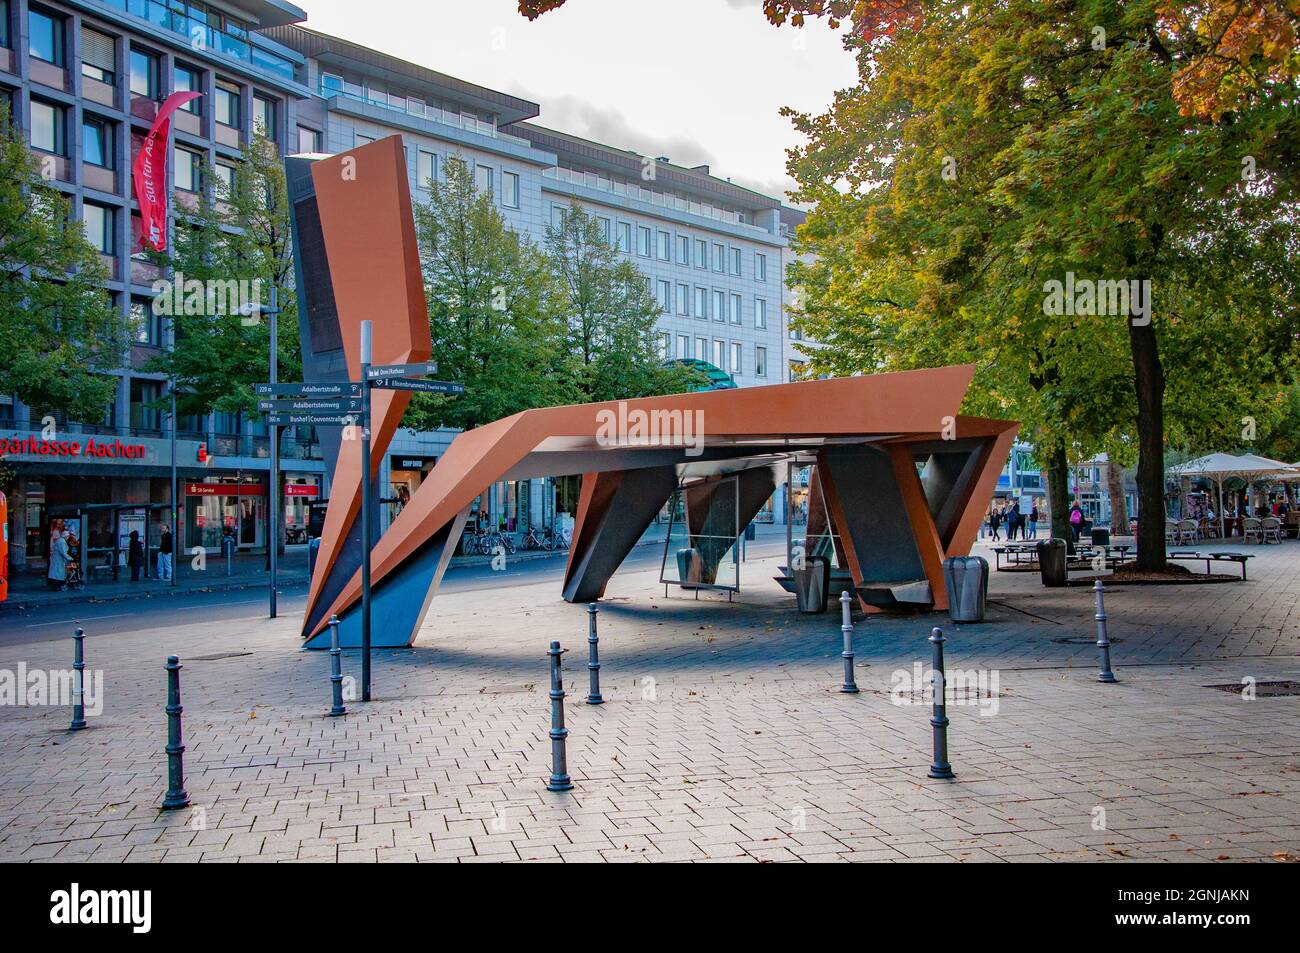 AACHEN, GERMANY. OCTOBER 04, 2020. Metalic monument next to Klenkes Sculpture In Holzgraben square Stock Photo